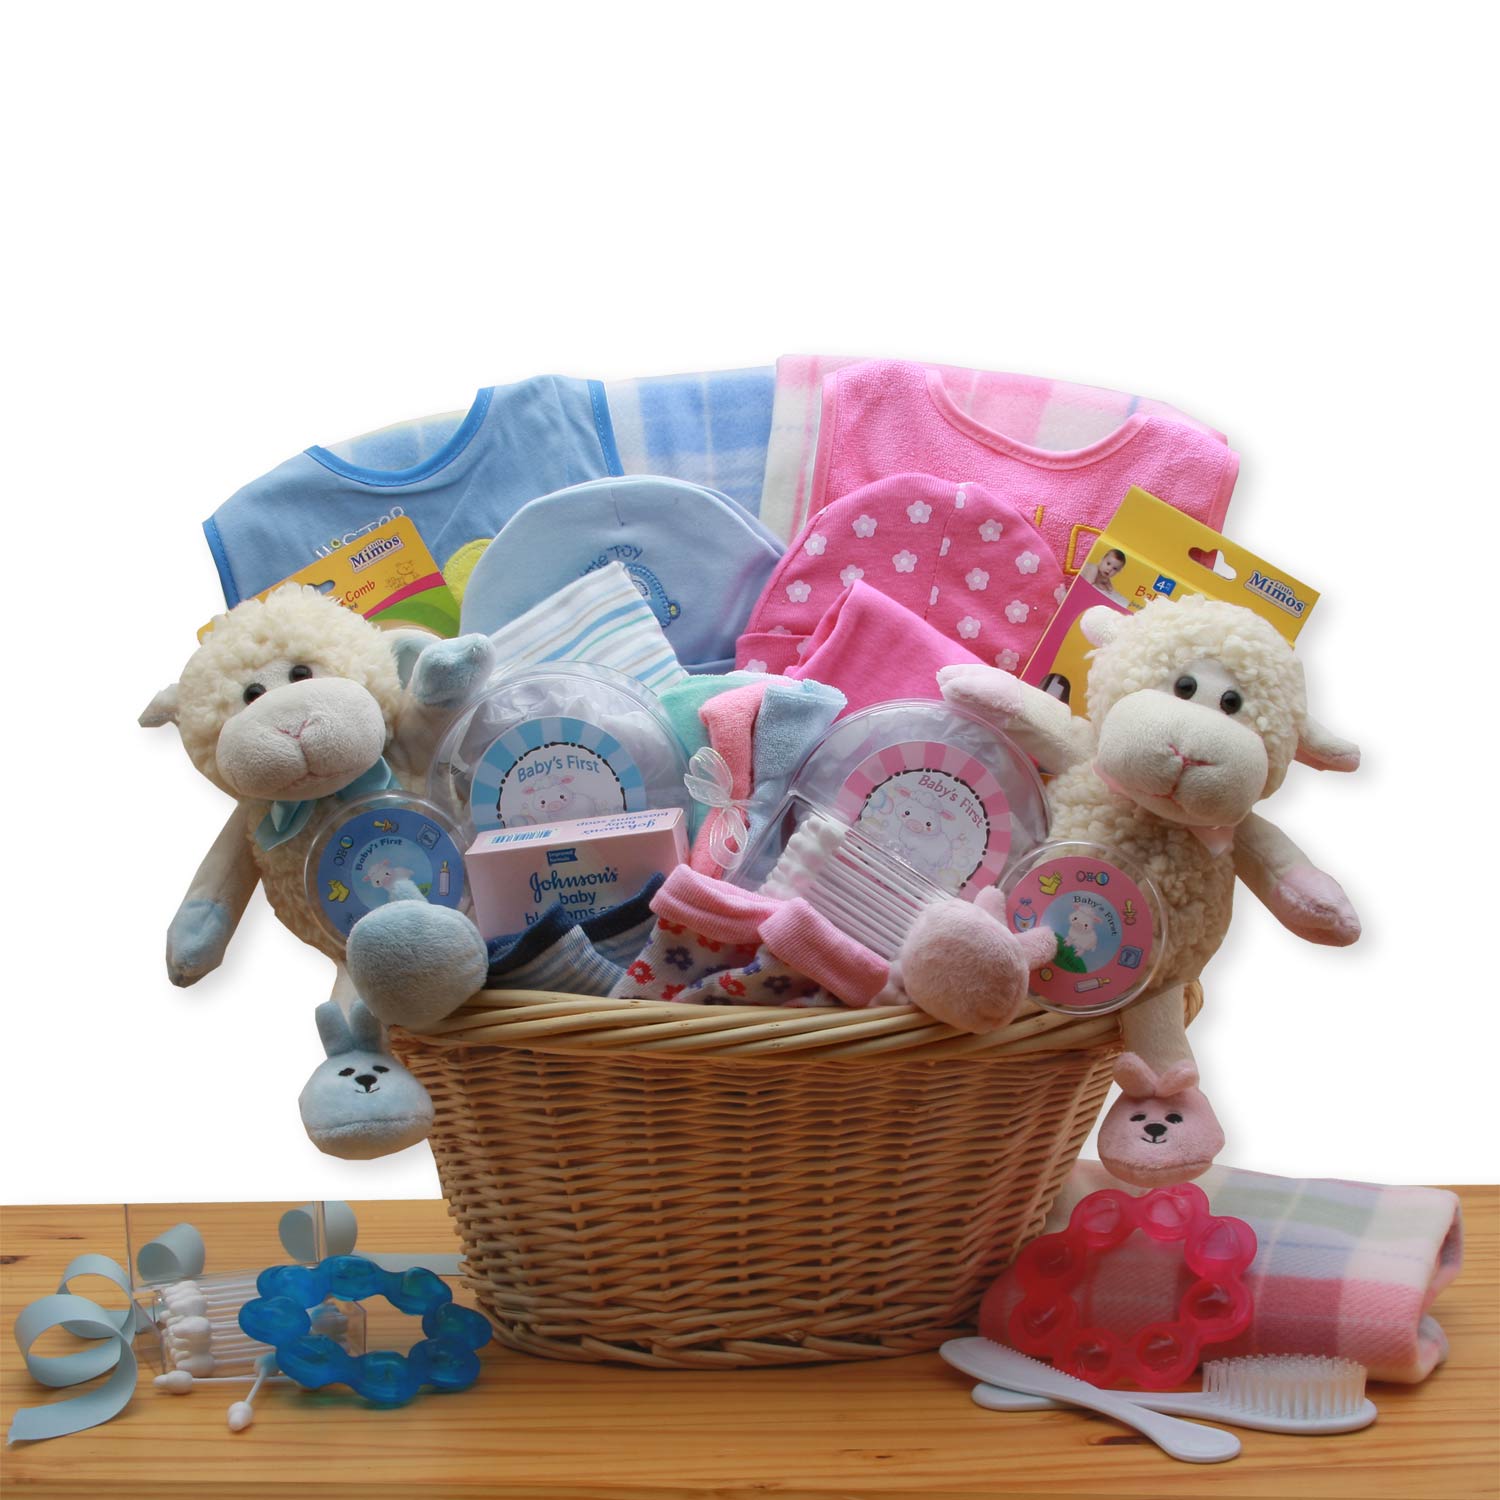 Double Delight Twins New Baby Gift Basket -Pink/Blue Flower Bouquet